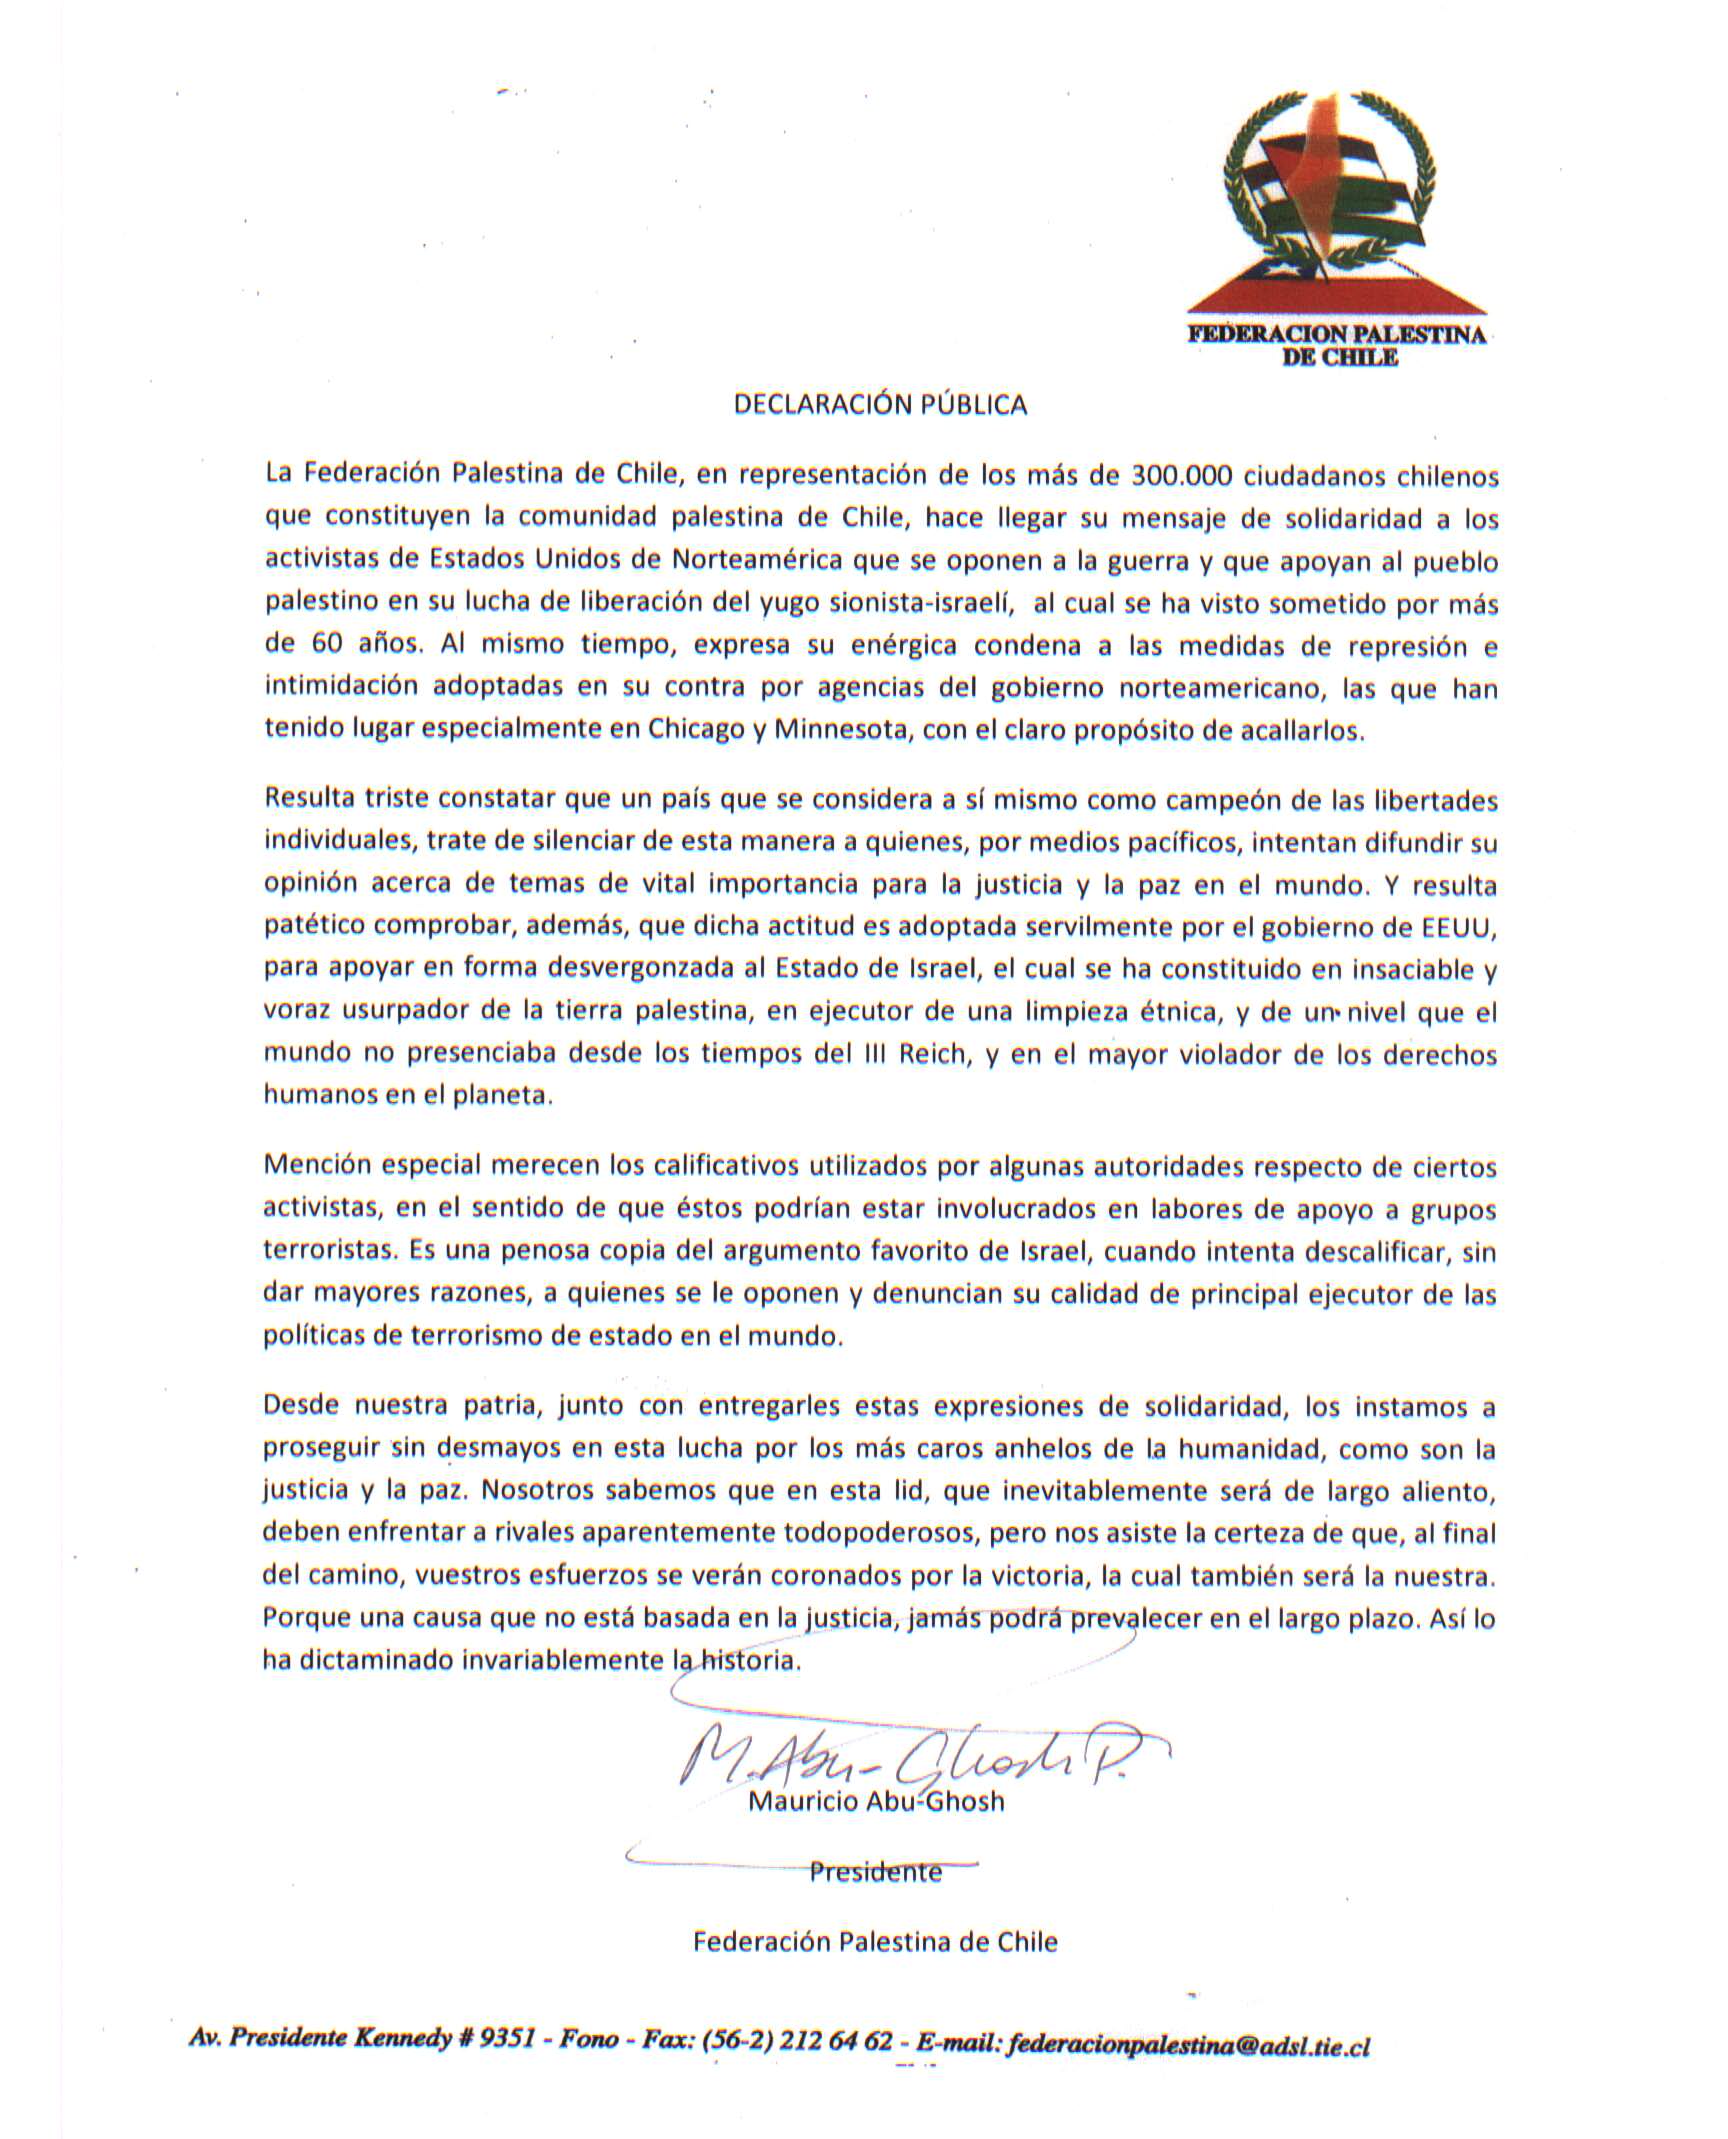 Public Declaration from the Palestinian Federation of Chile